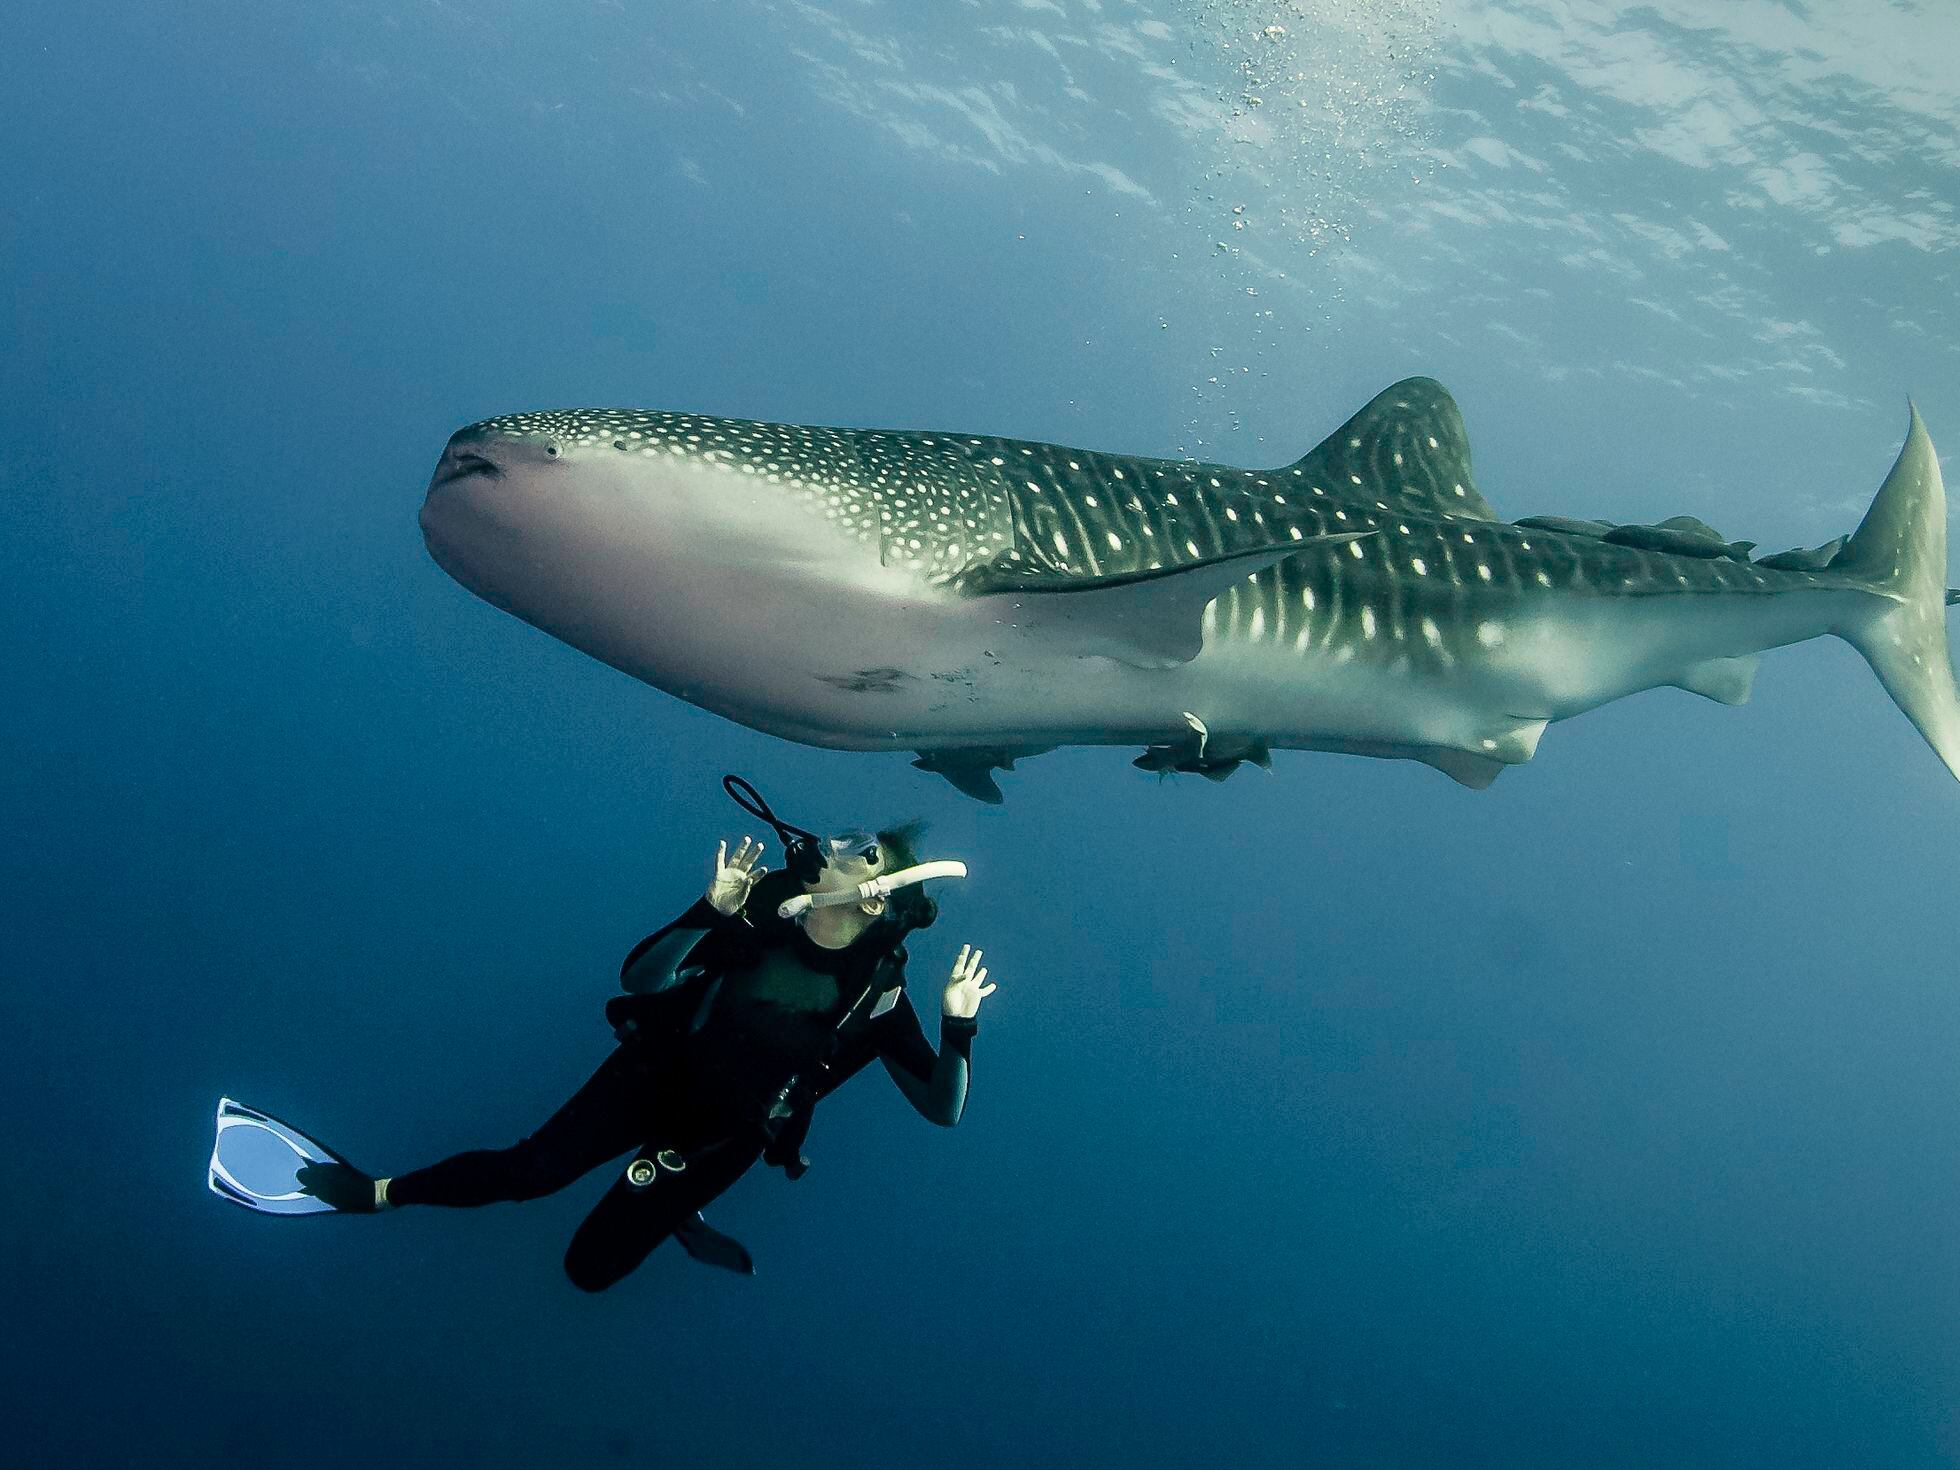 Misguided ecotourism may lead to changes in whale shark behavior, Science